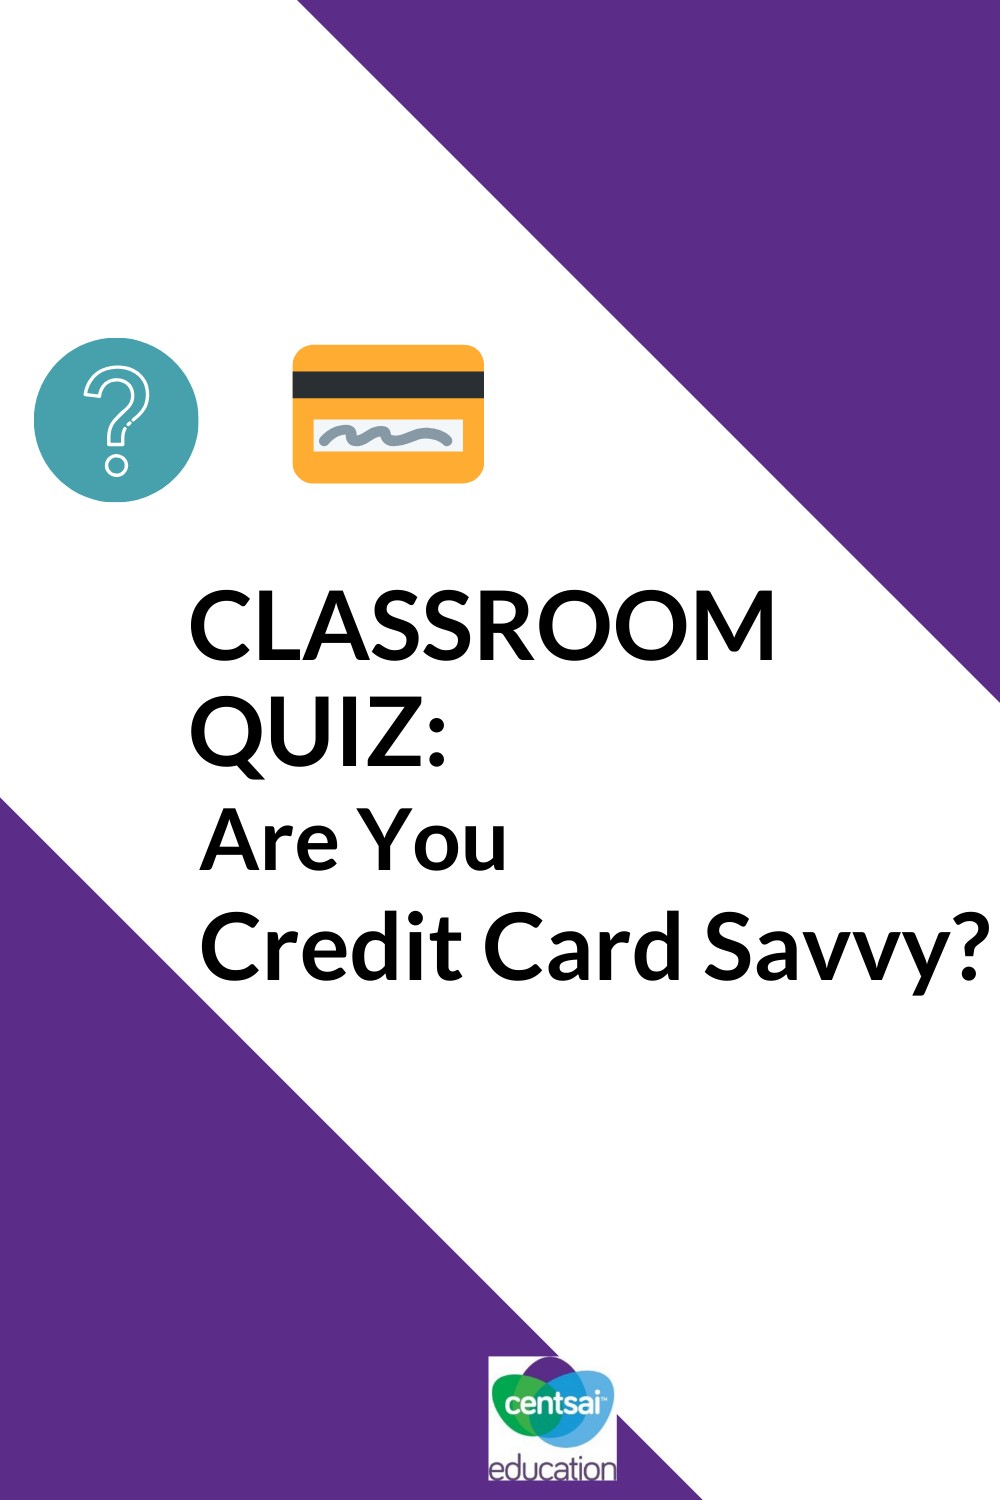 How many of your students have credit cards? None? Some? All? How many will have a credit card someday? Find out if they're ready. #creditcard #bettercreditscore #buildcreditscore #CentSaiEducation